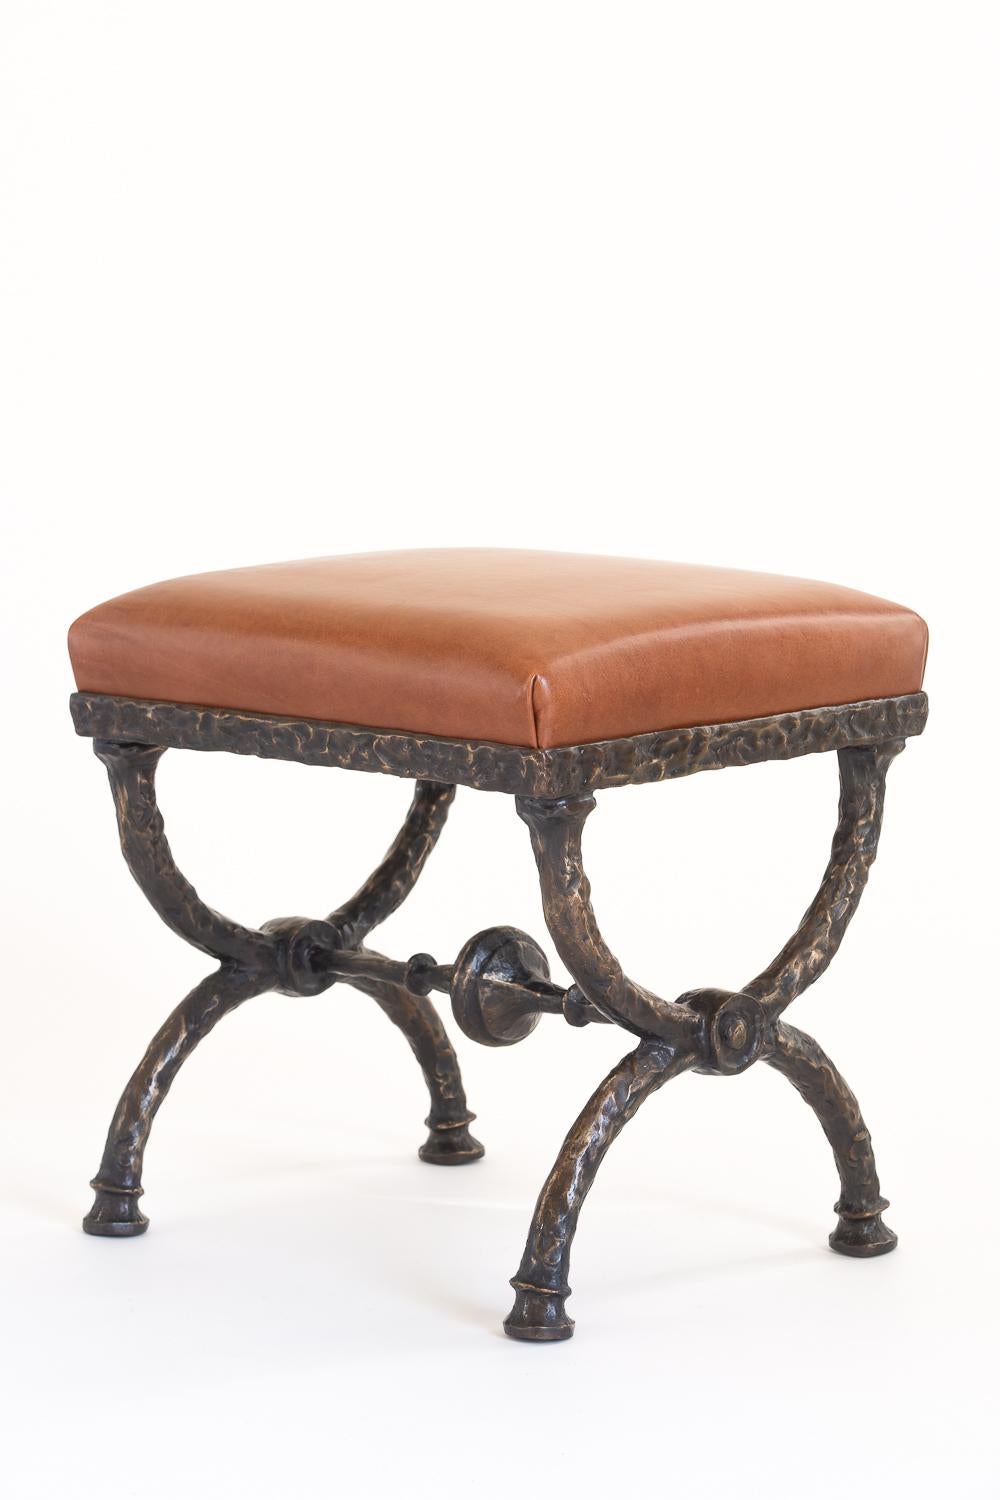 Organic Modern Bronze Stool with Upholstered Brown or Black Leather Seat For Sale